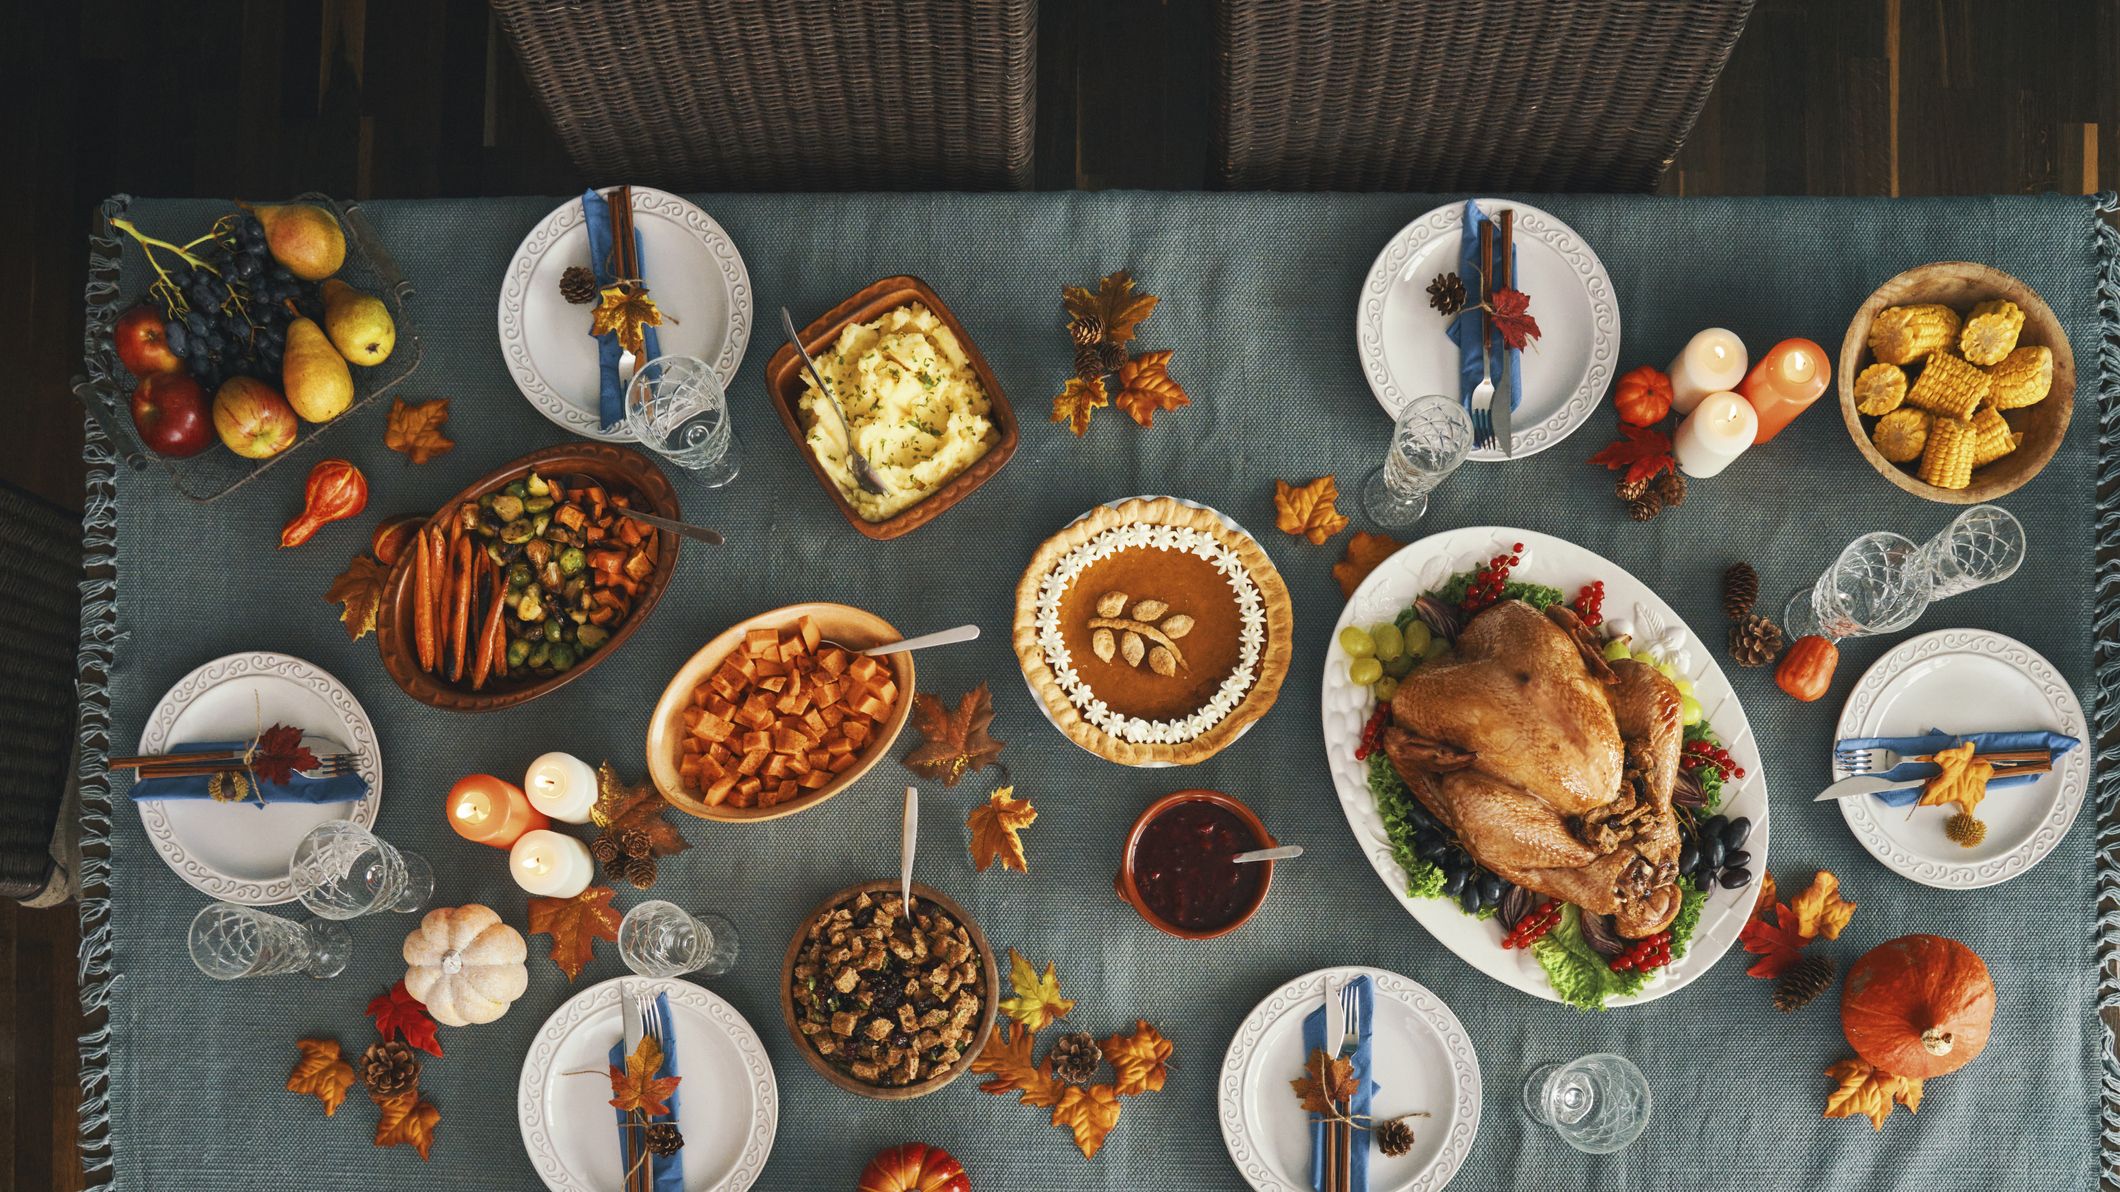 Thanksgiving Day Fast Facts